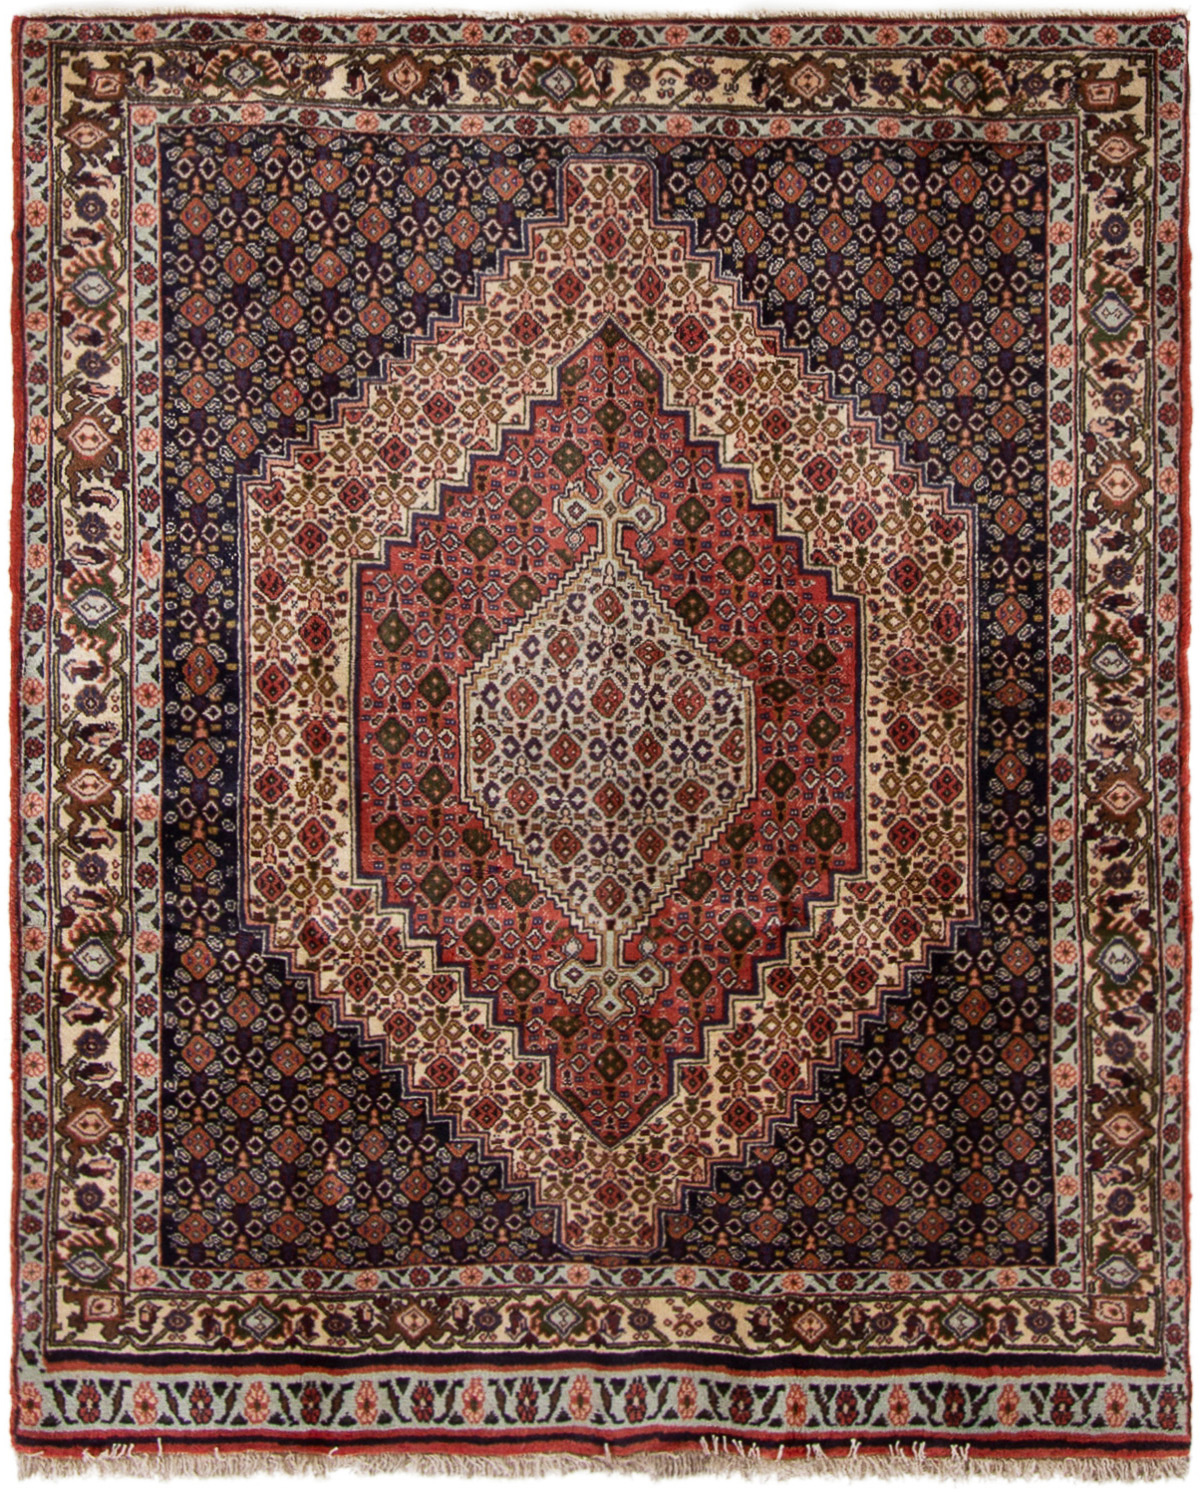 Hand-knotted Senneh  Wool Rug 4'6" x 5'5" Size: 4'6" x 5'5"  